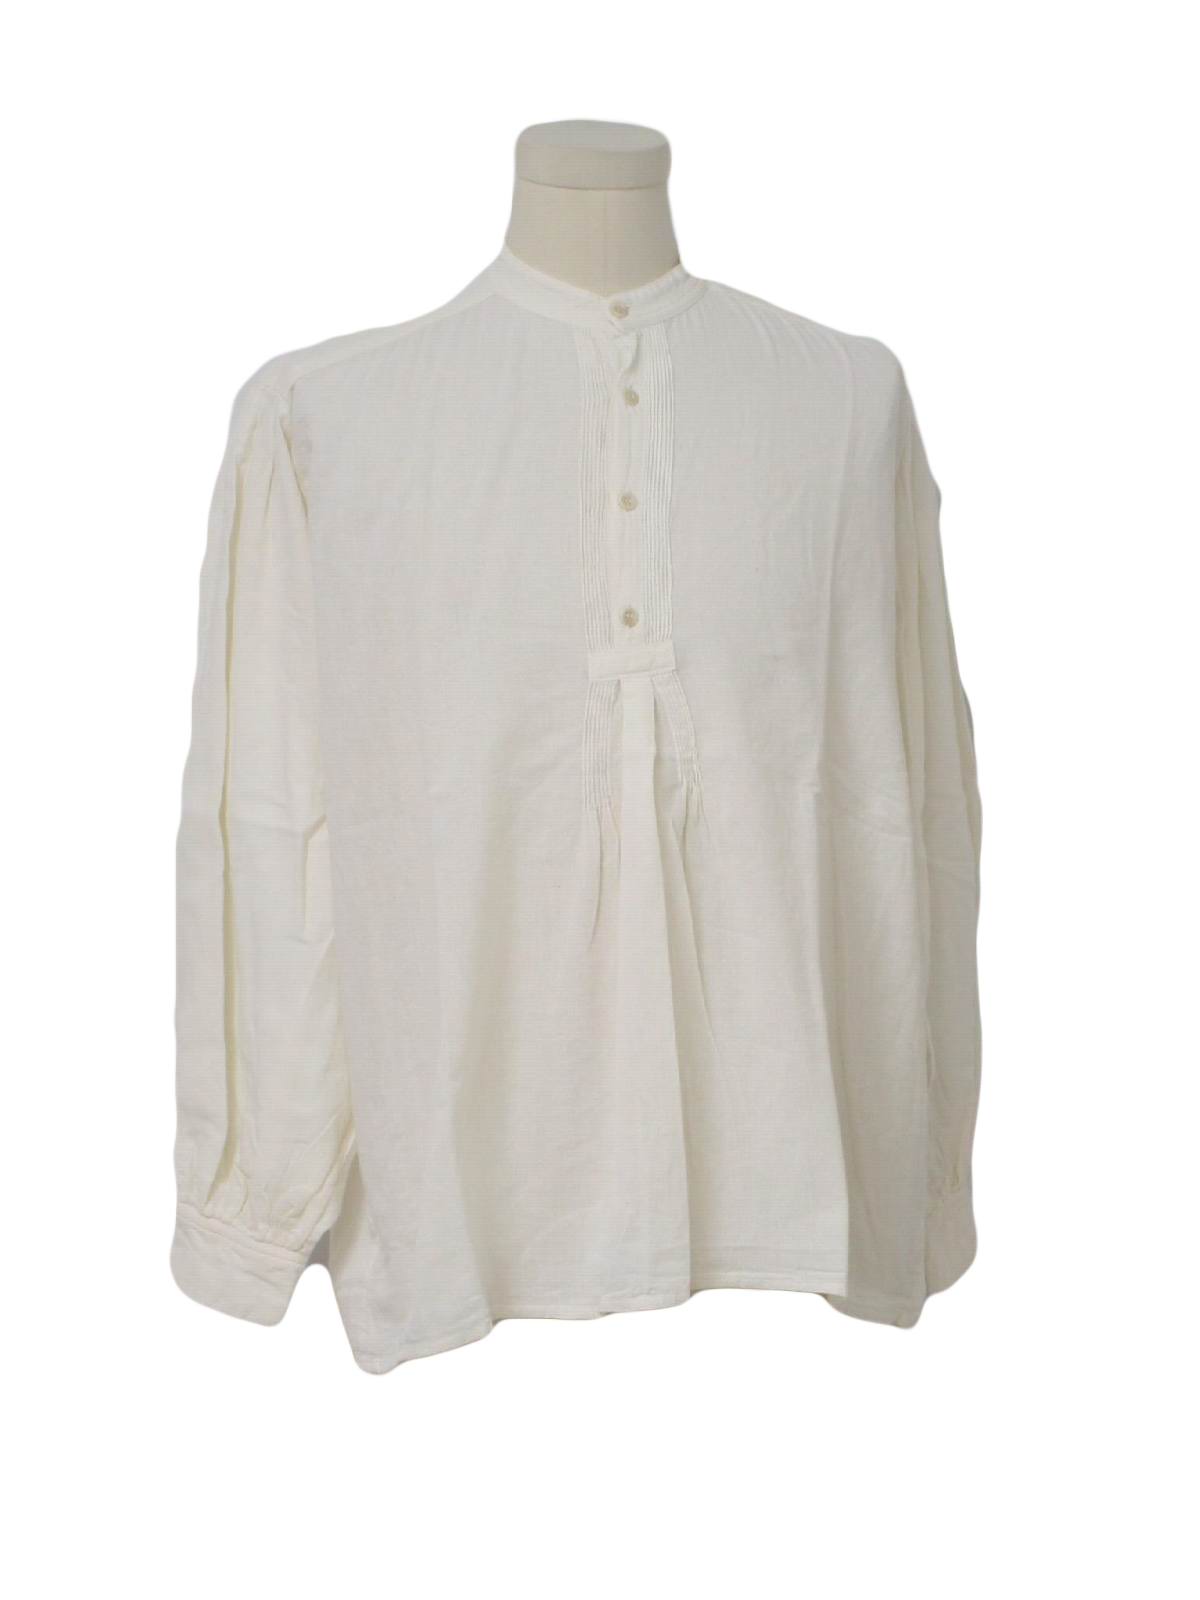 20s Shirt: Pre-1920s style (made in late 90s or early 2000s) -The J ...